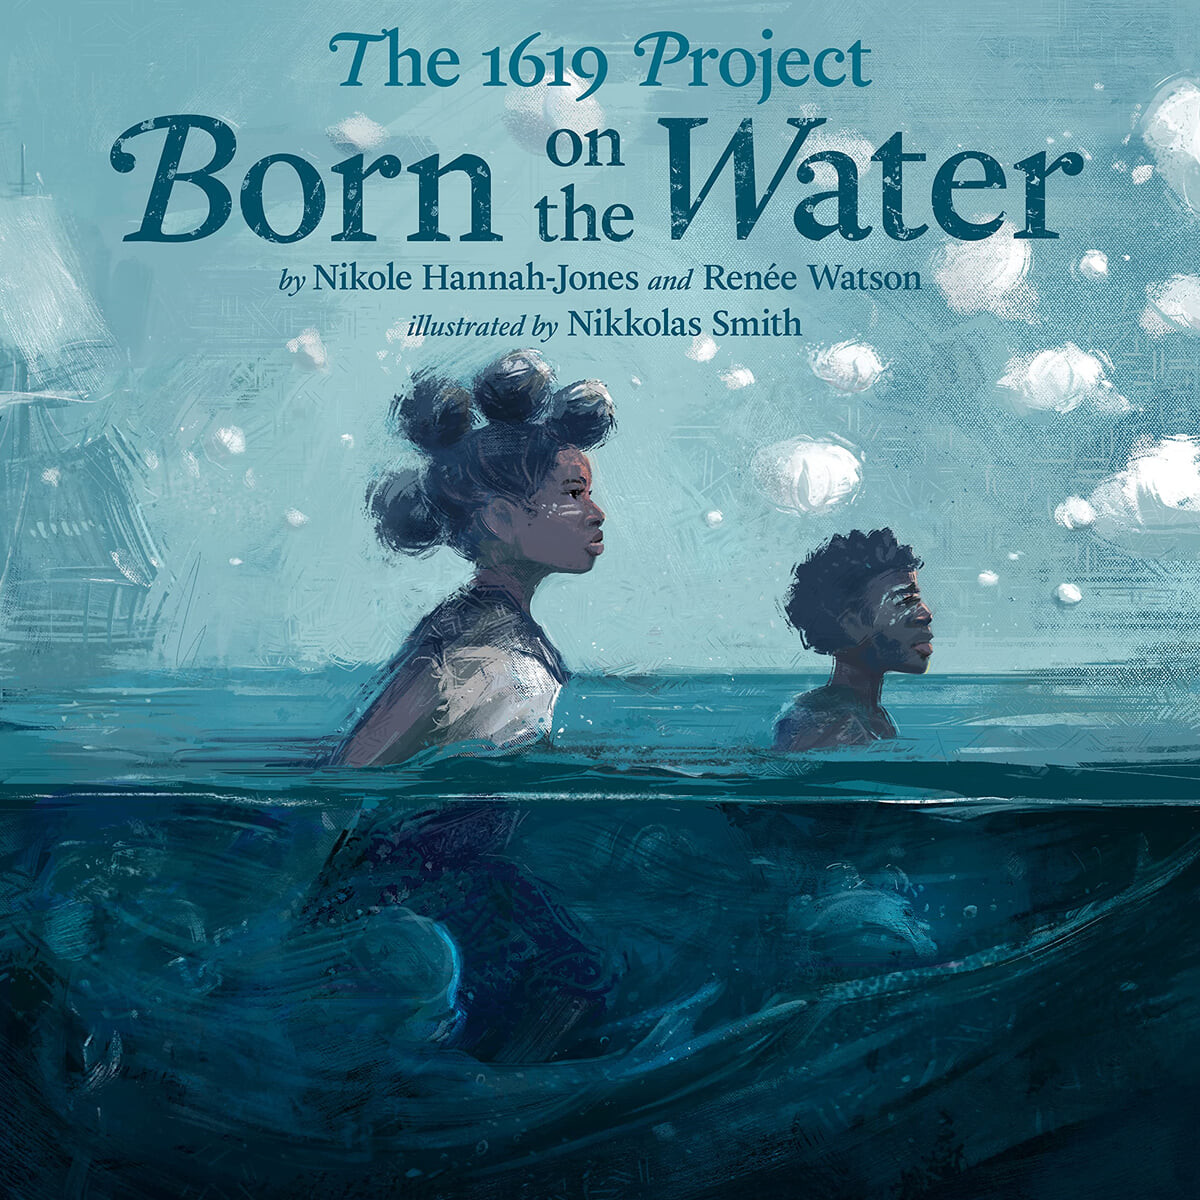 (The)1619 project : Born on the water